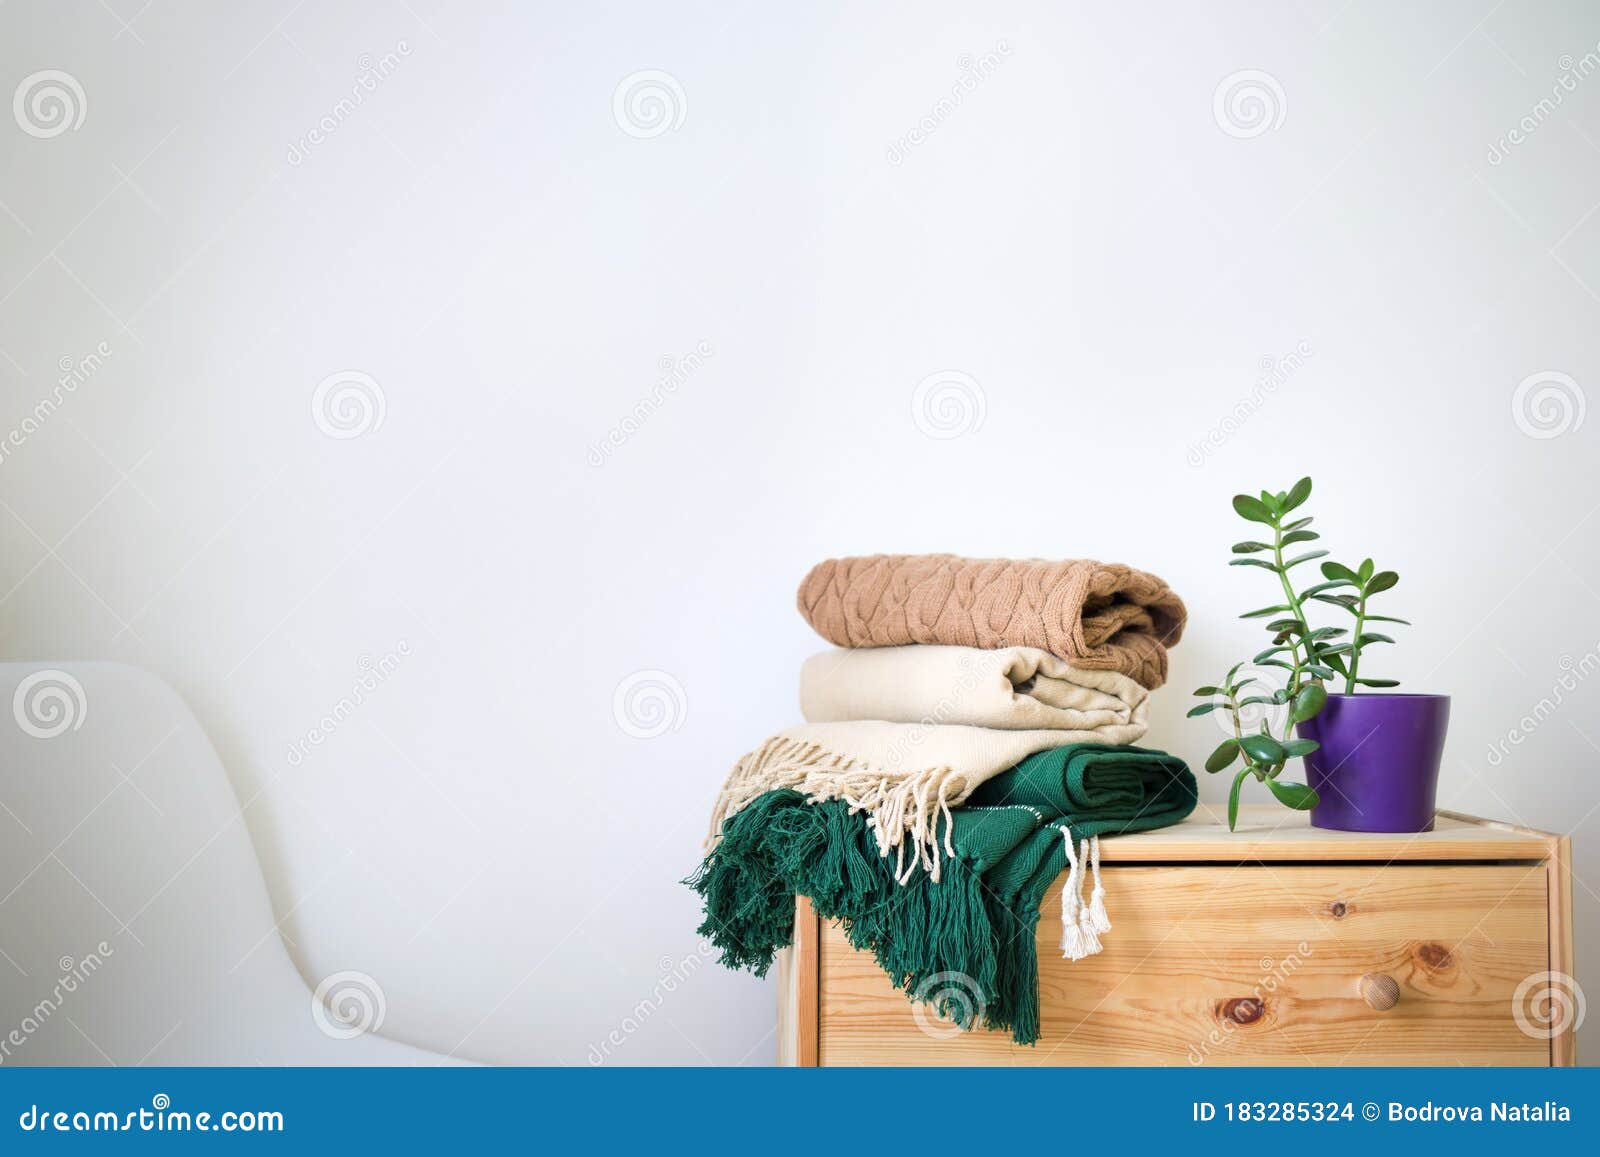 Concept of Coziness, Comfort and Warmth at Home Stock Photo - Image of